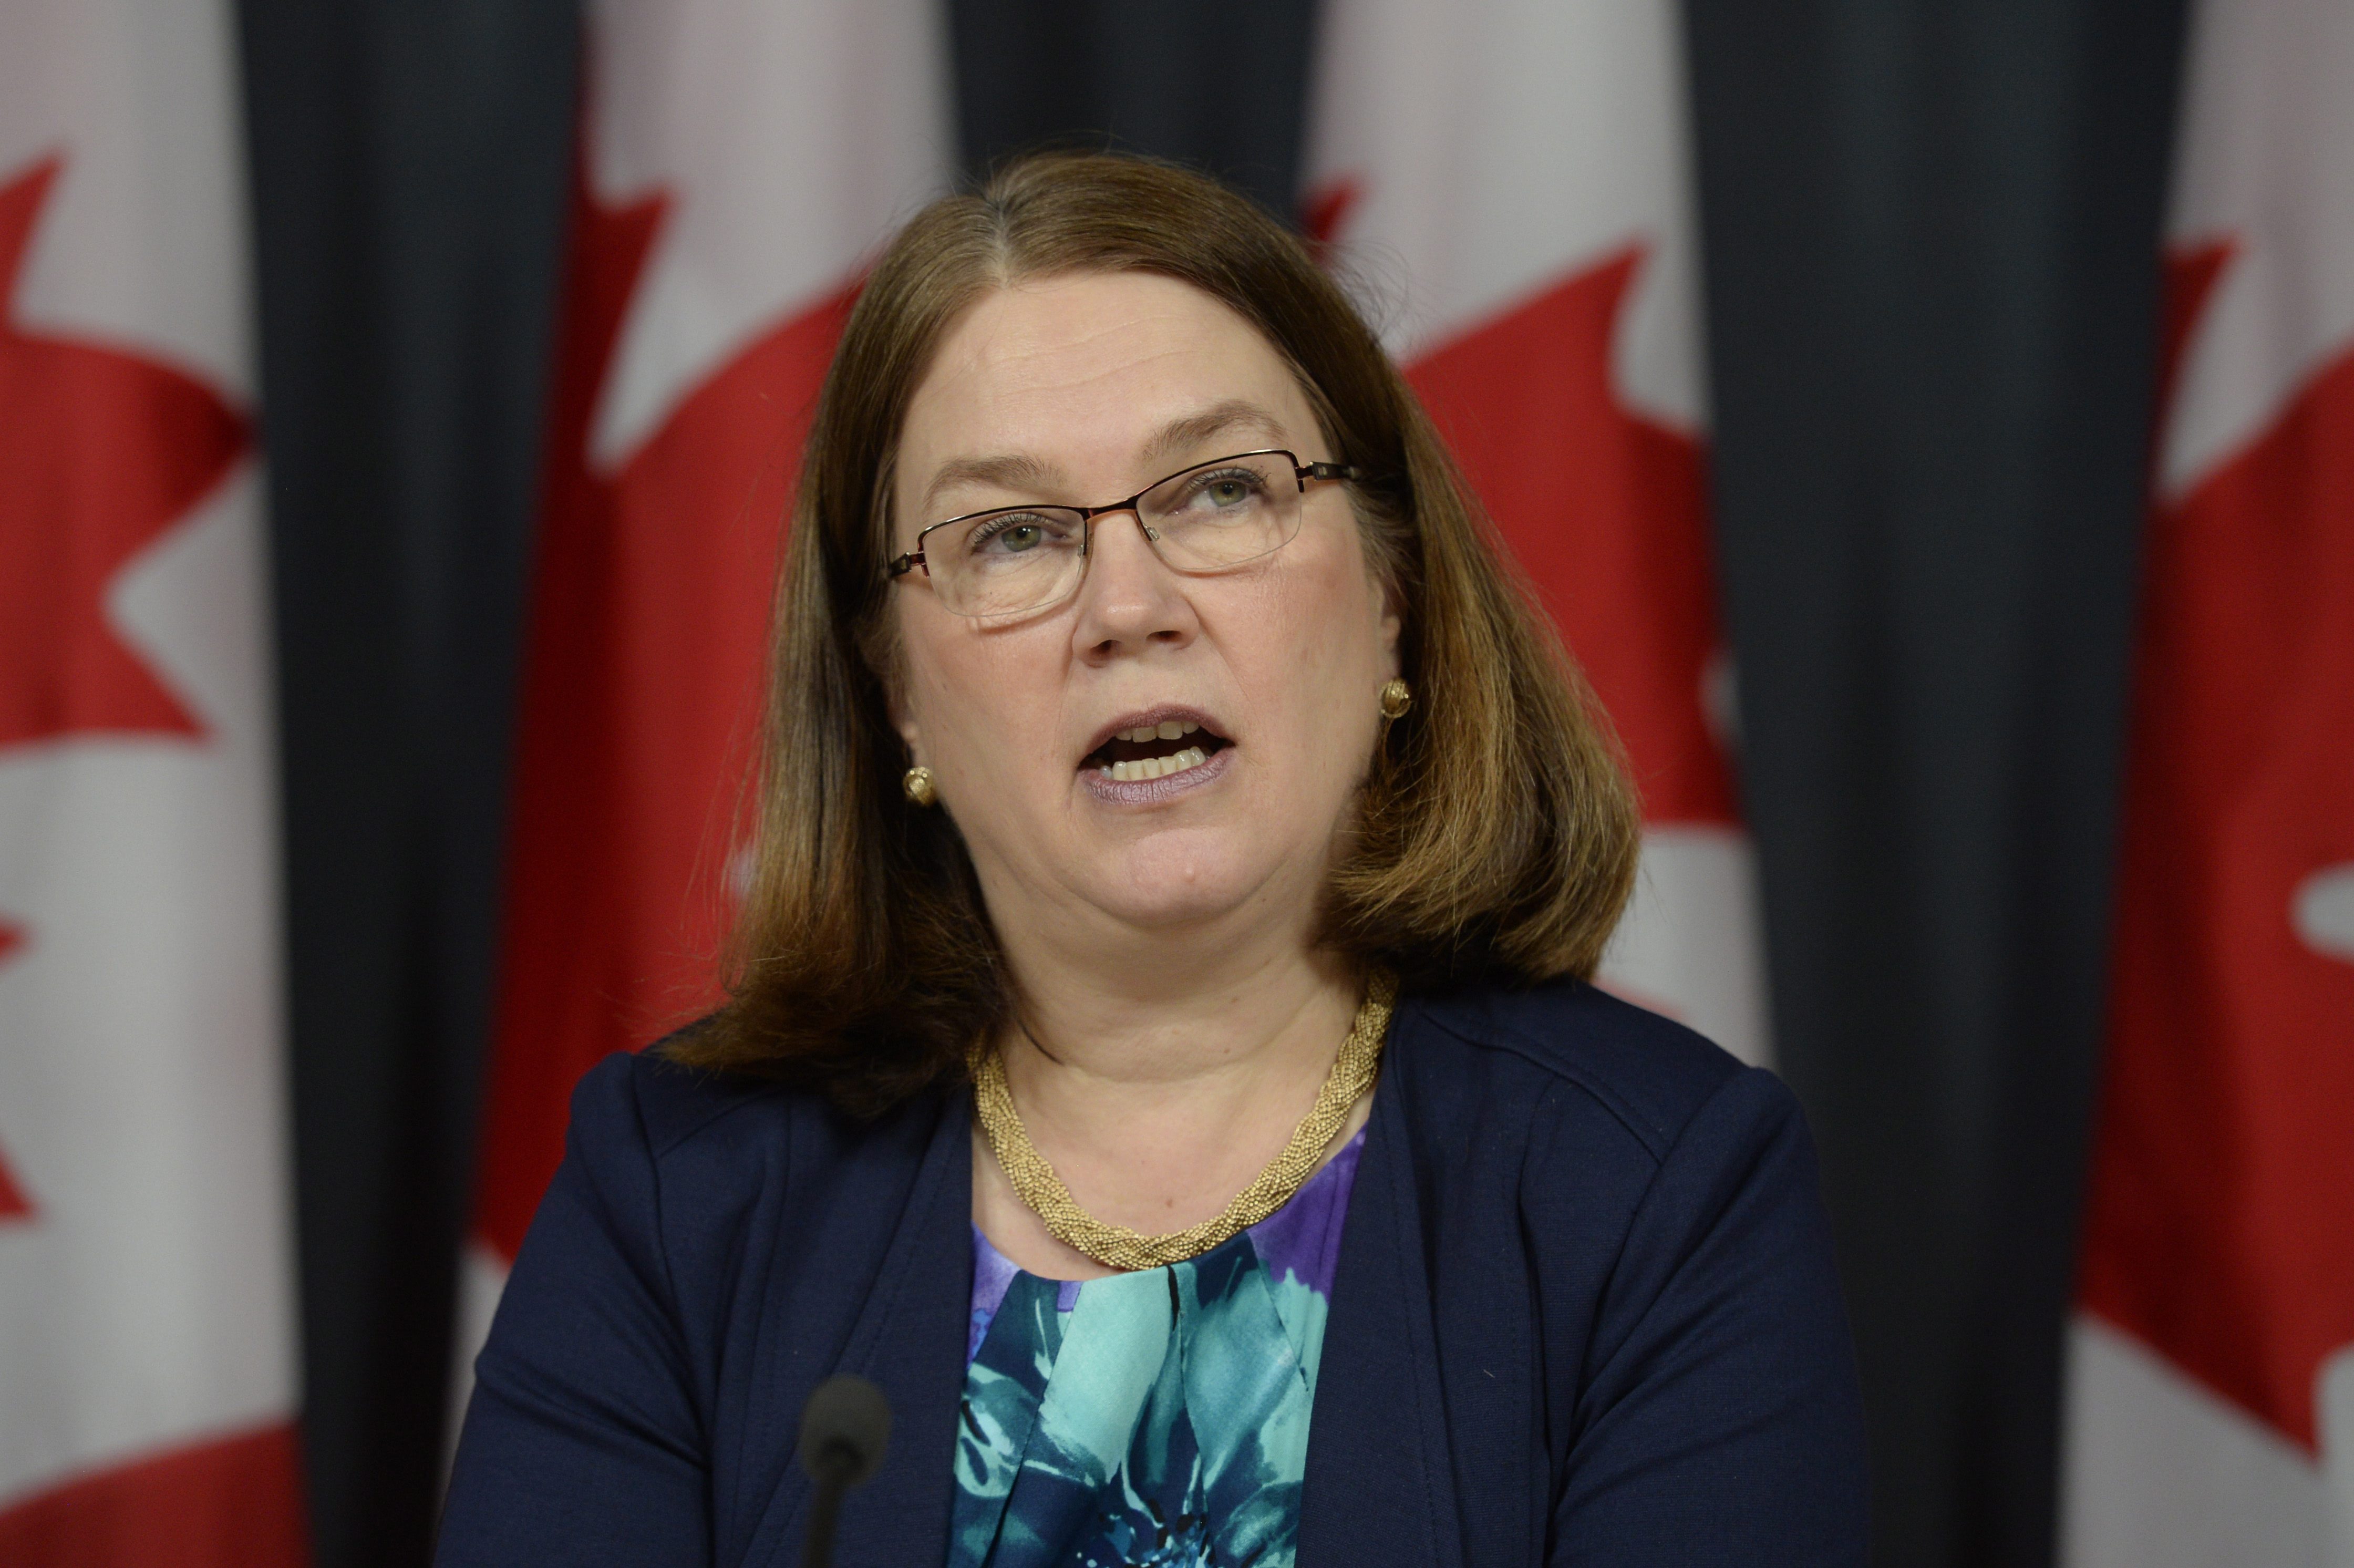 Canada Health Minister Jane Philpott speaks at a news conference in Ottawa on April 14, 2016. (Adrian Wyld—AP)